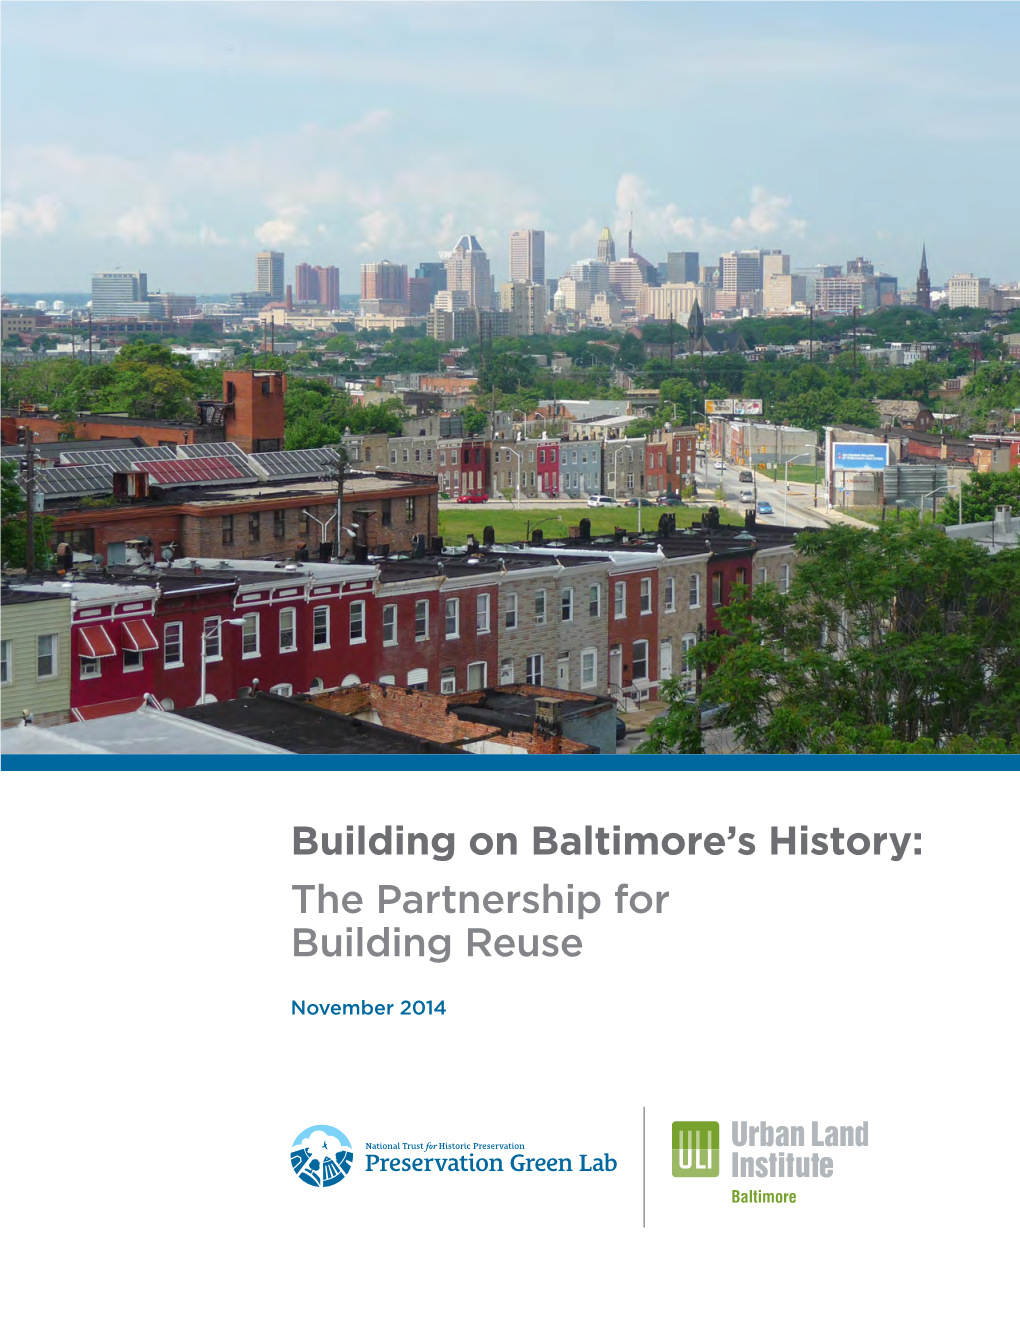 Building on Baltimore's History: the Partnership for Building Reuse